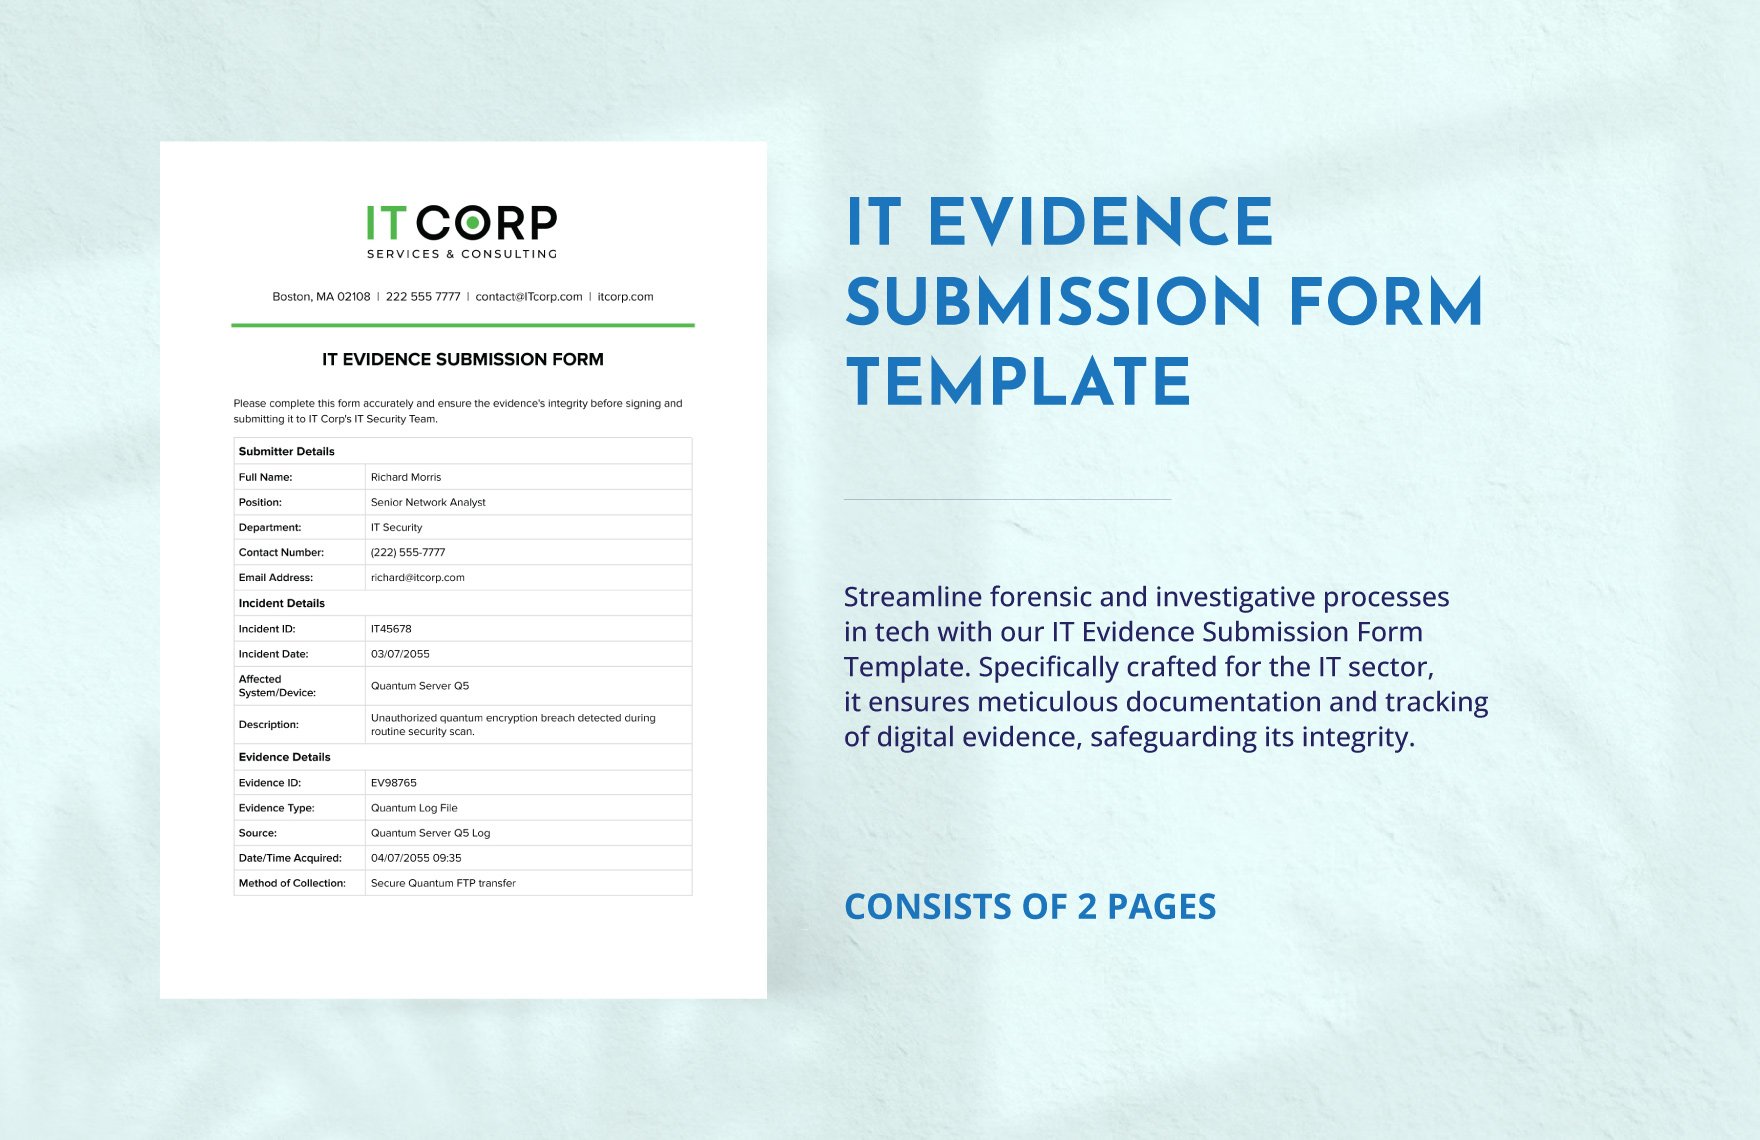 IT Evidence Submission Form Template in Word, Google Docs, PDF